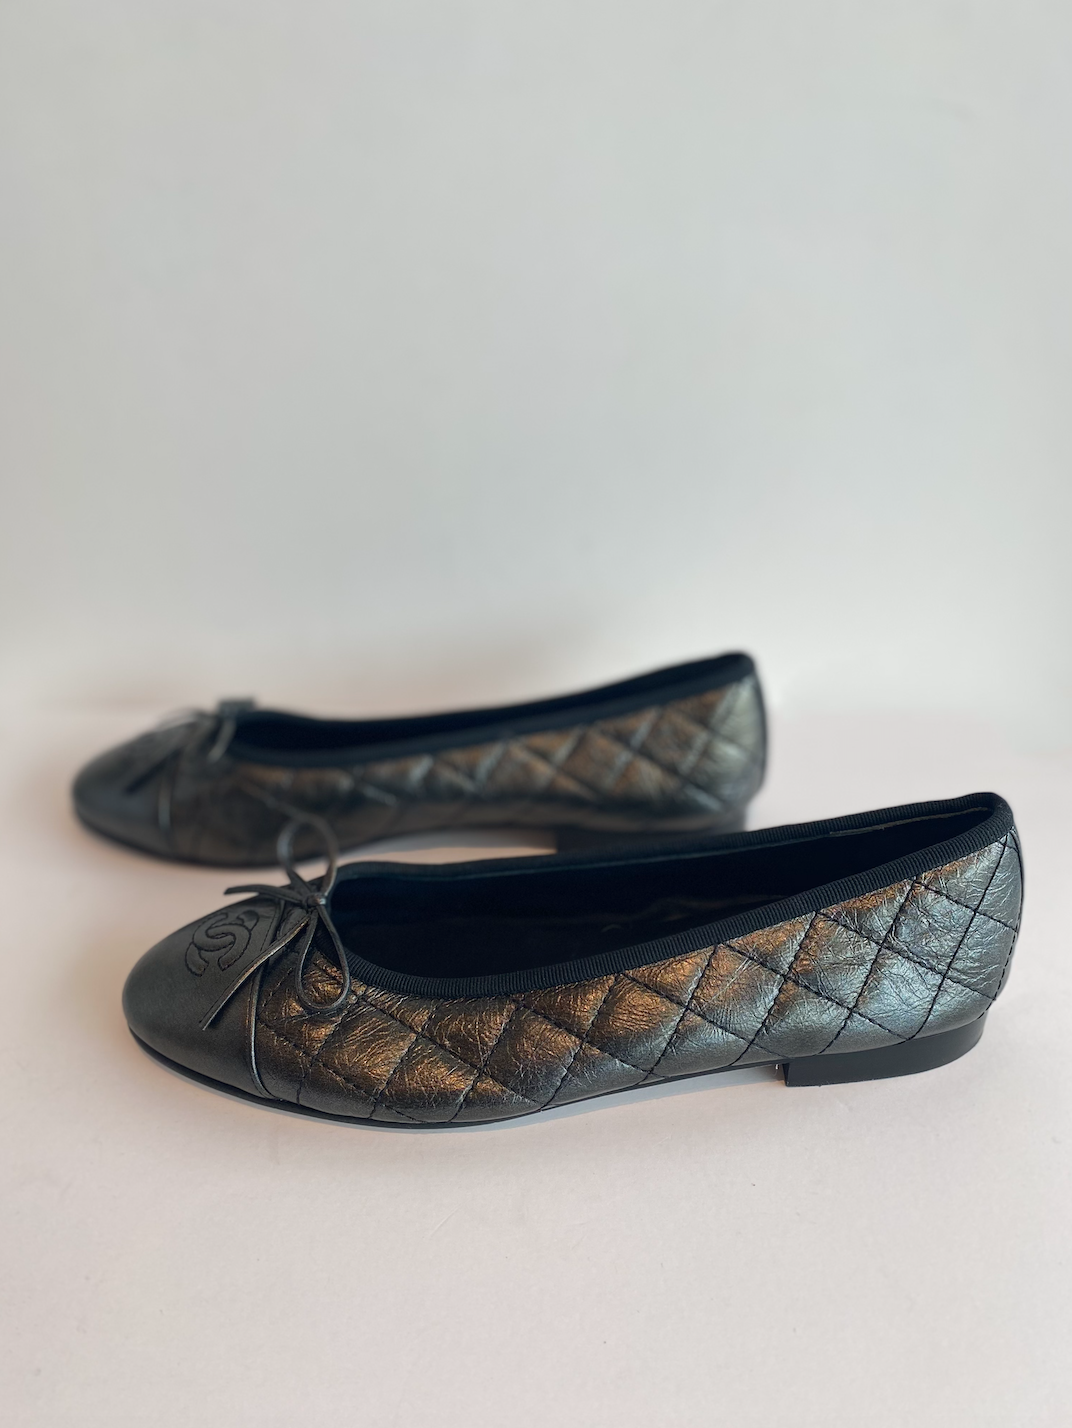 Chanel Quilted Ballet Flat in Gunmetal Side